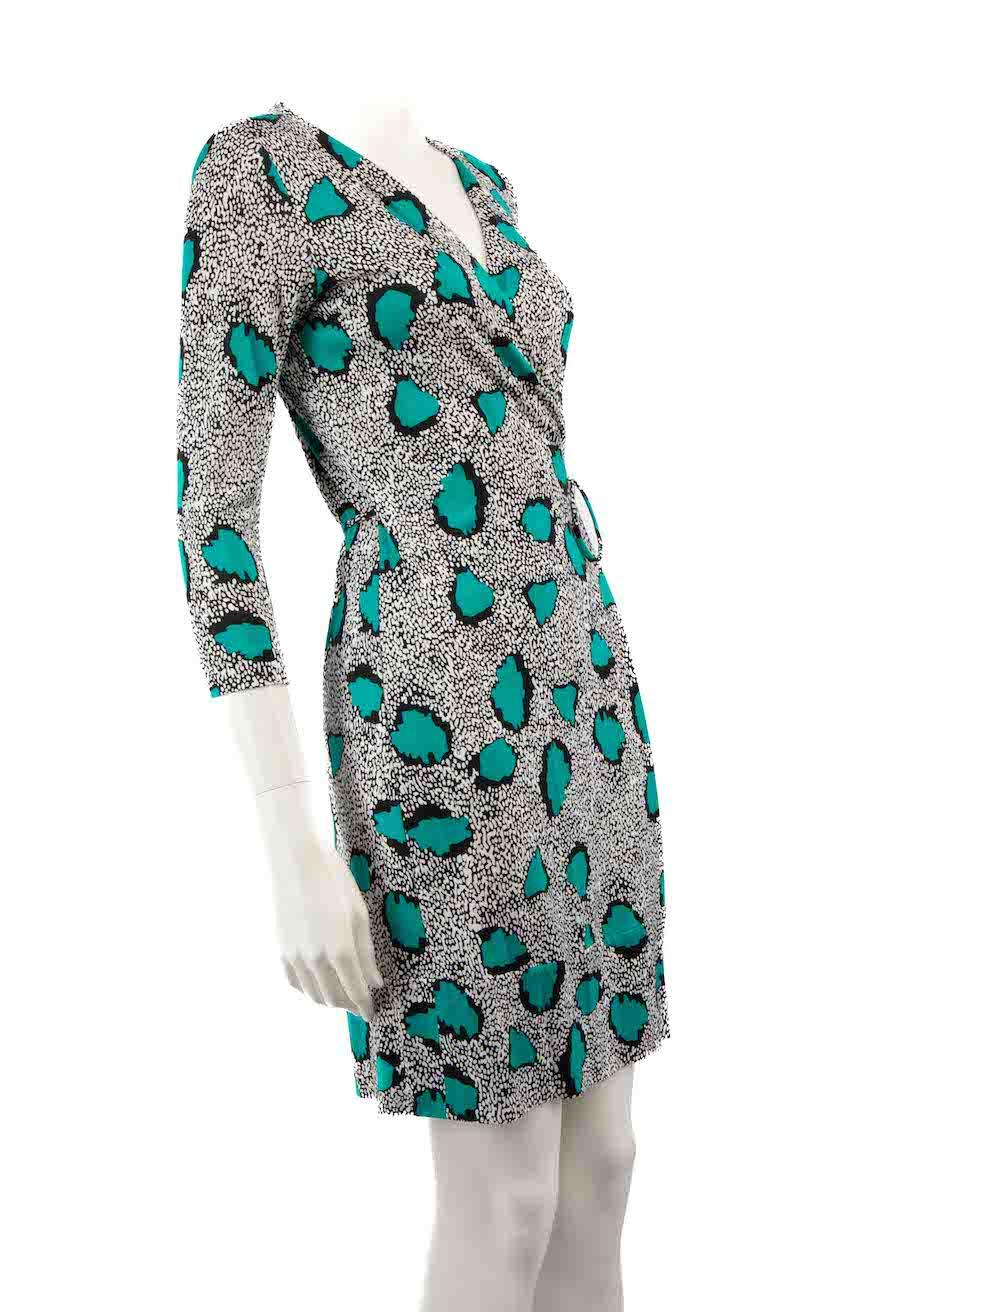 CONDITION is Very good. Hardly any visible wear to dress is evident on this used Diane Von Furstenberg designer resale item.
 
 
 
 Details
 
 
 Multicolour- black, white, green
 
 Silk
 
 Wrap dress
 
 Long sleeves
 
 Mini
 
 V-neck
 
 Tie